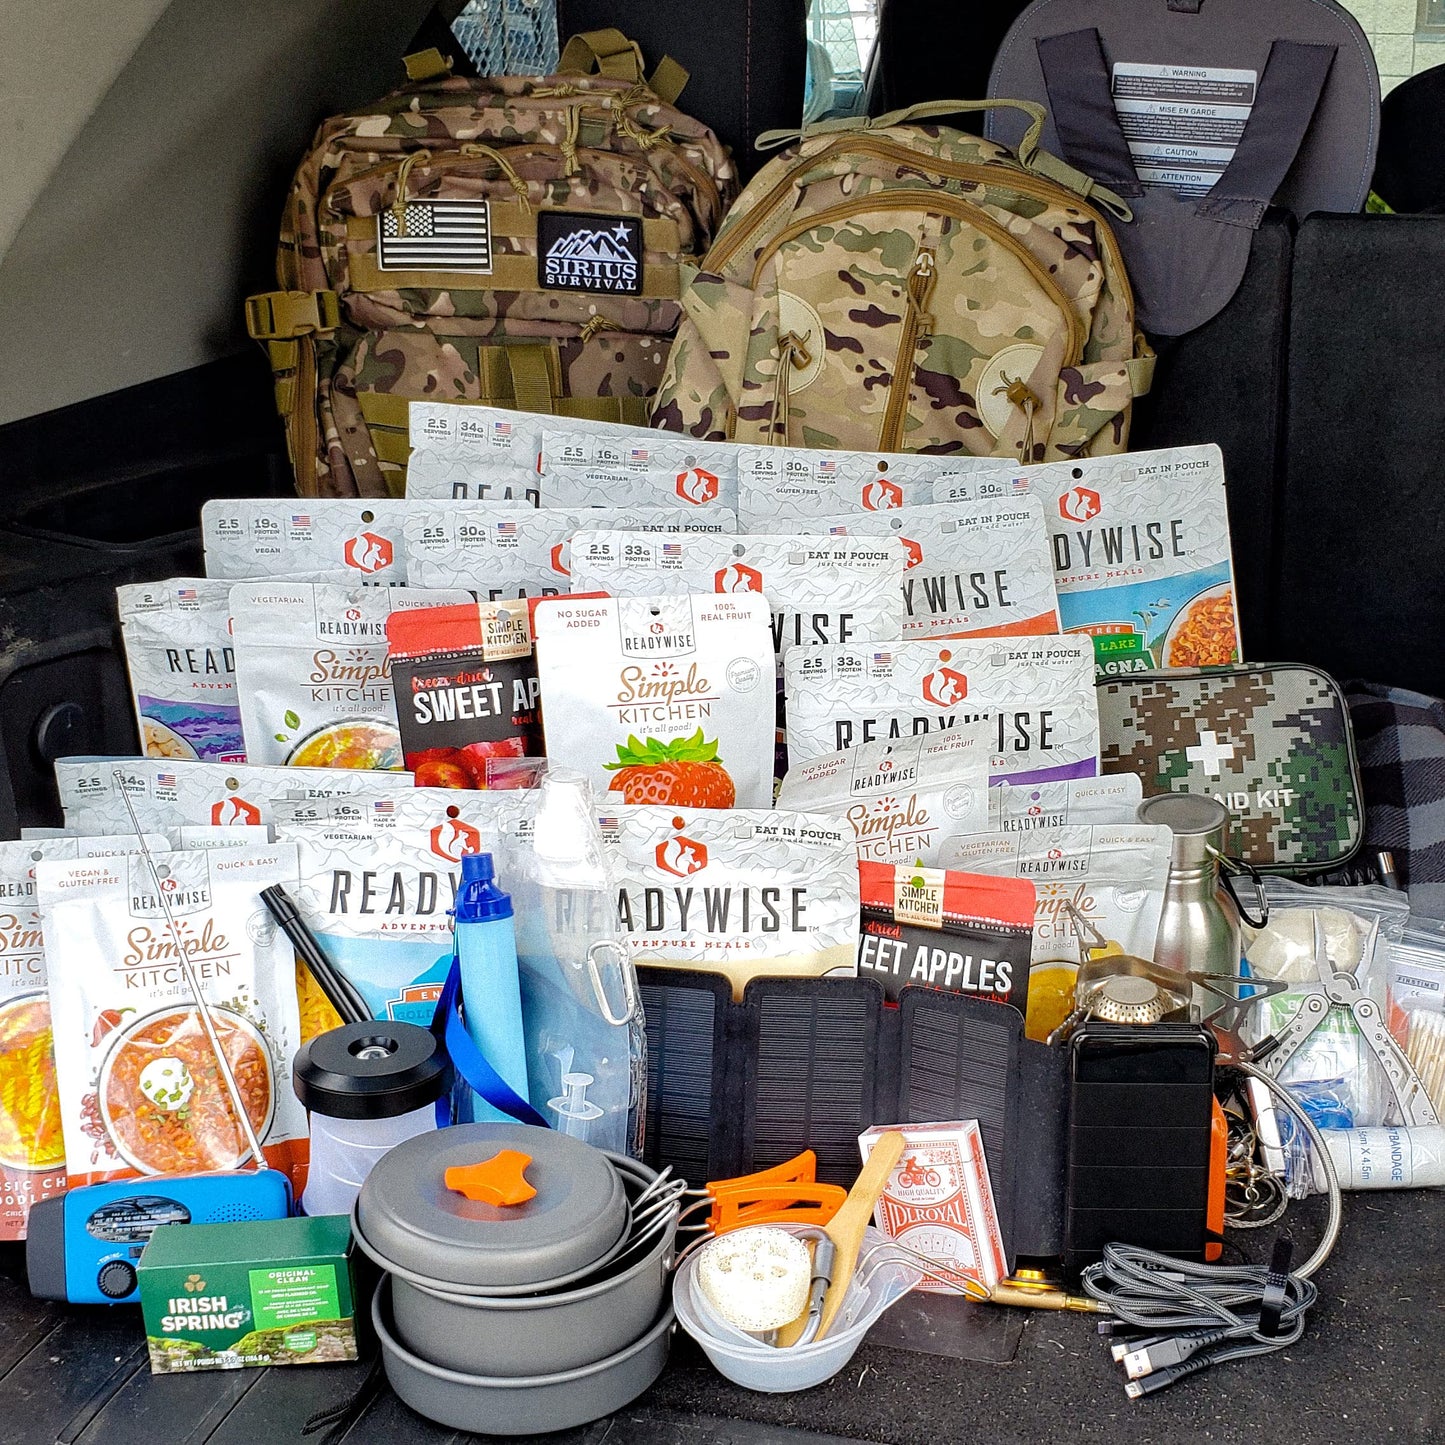 Family Comfort 72 Emergency Survival Kit/Backpack – 72 Hour for 6 People – Disaster Preparedness – Delicious Survival Food, Gear, Lighting, First Aid & More, Olive Drab